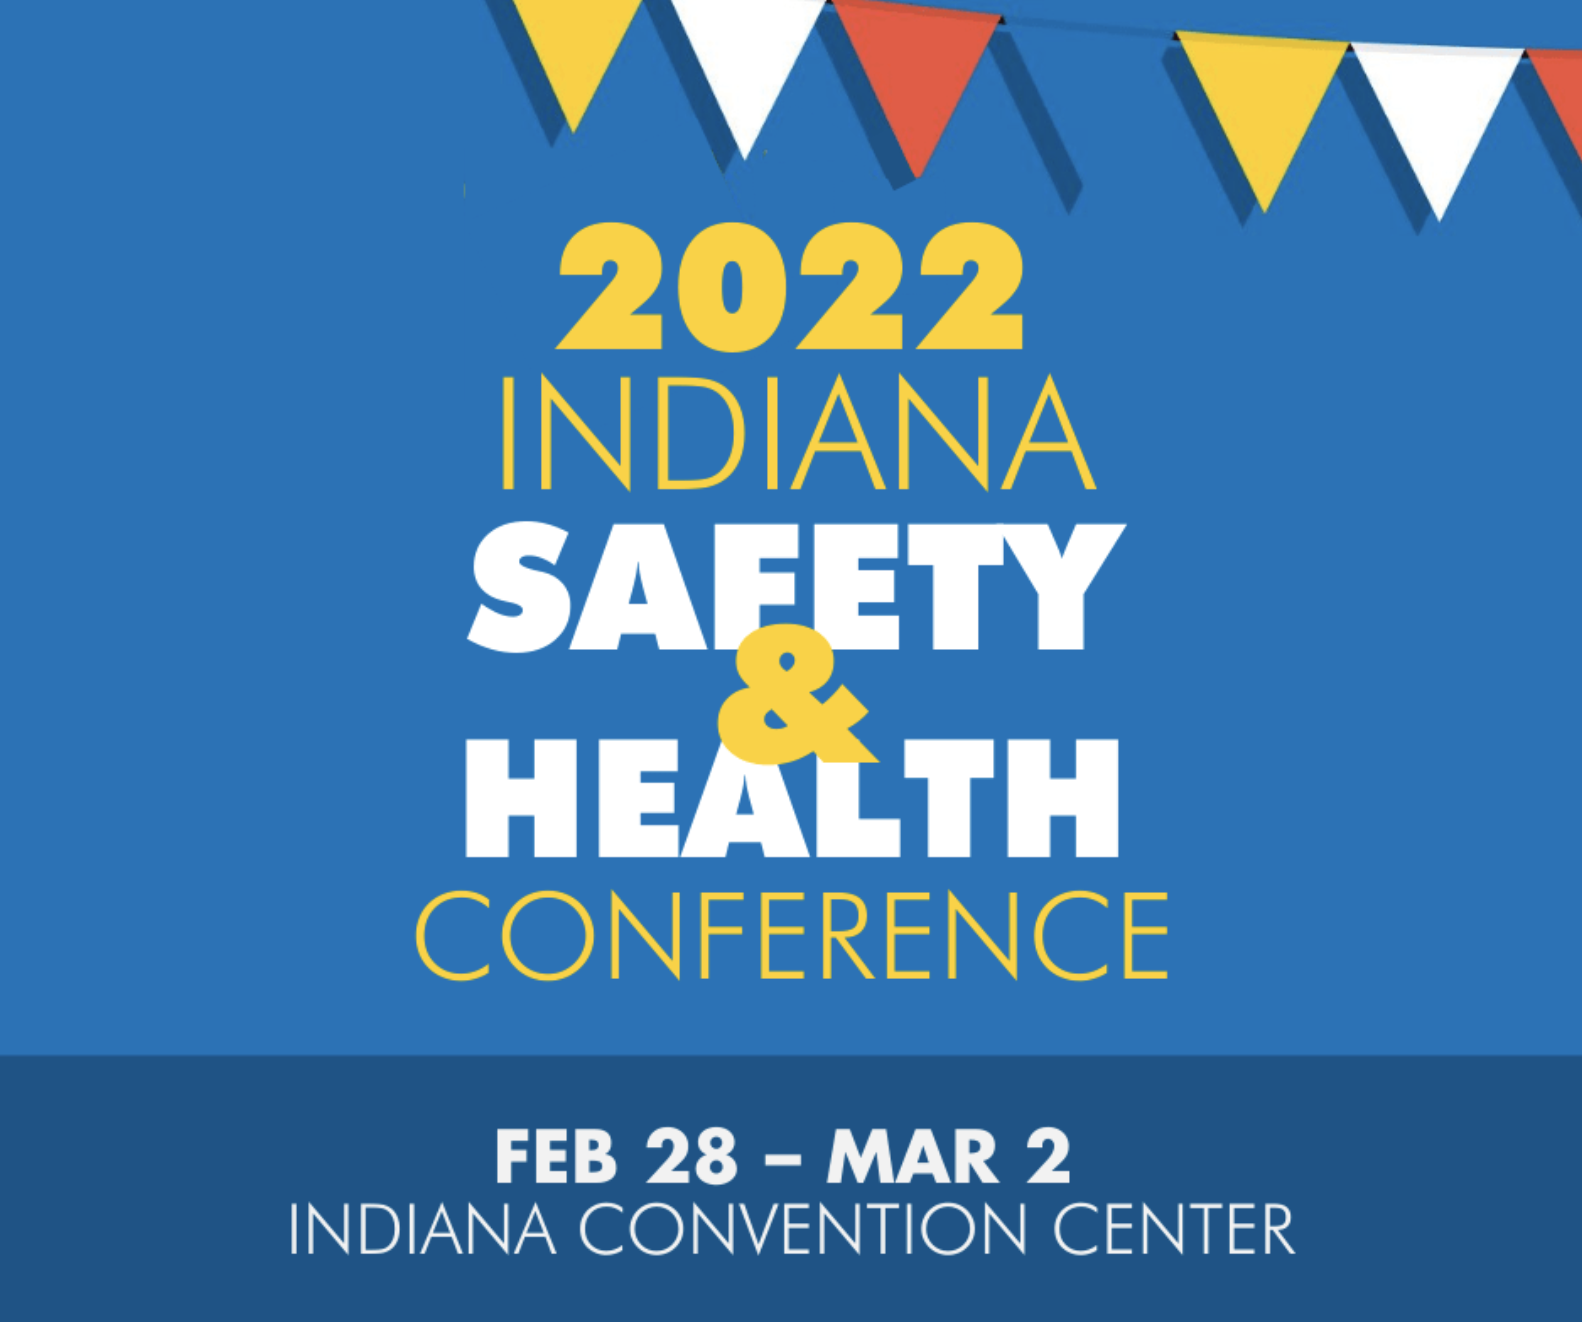 Tom West Speaking at 2022 Indiana Safety & Health Conference